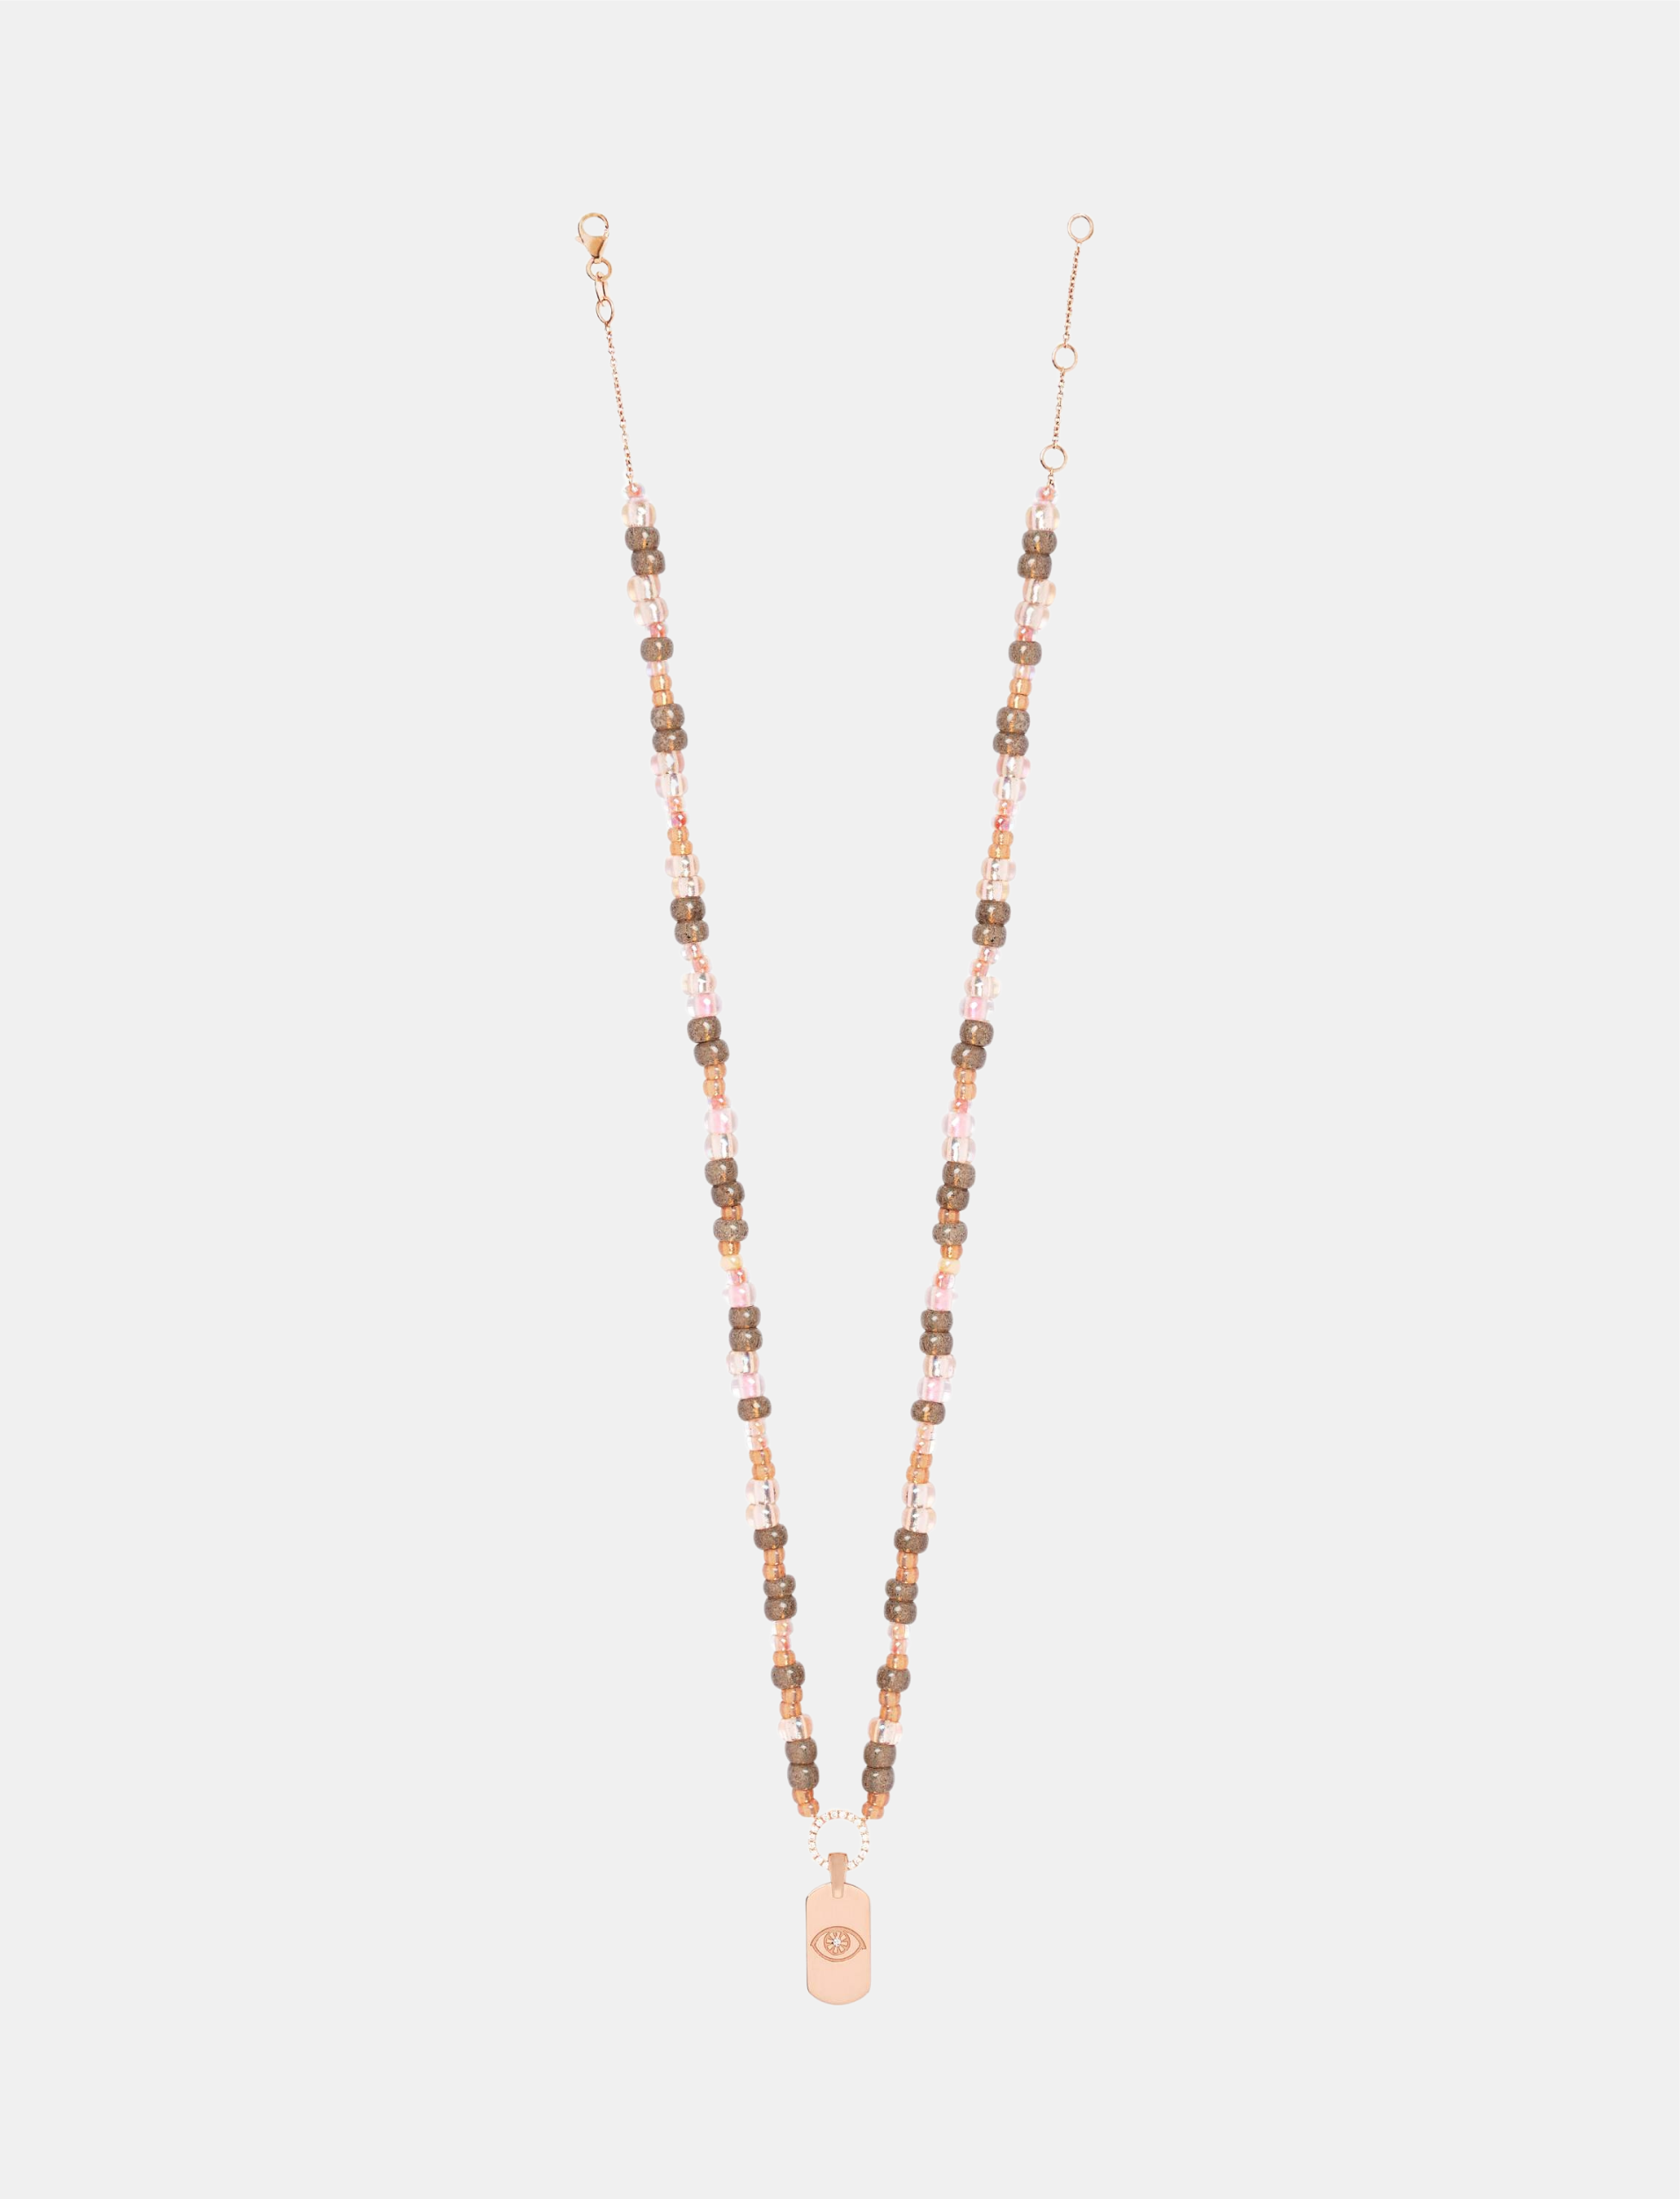 Nude Beaded Necklace